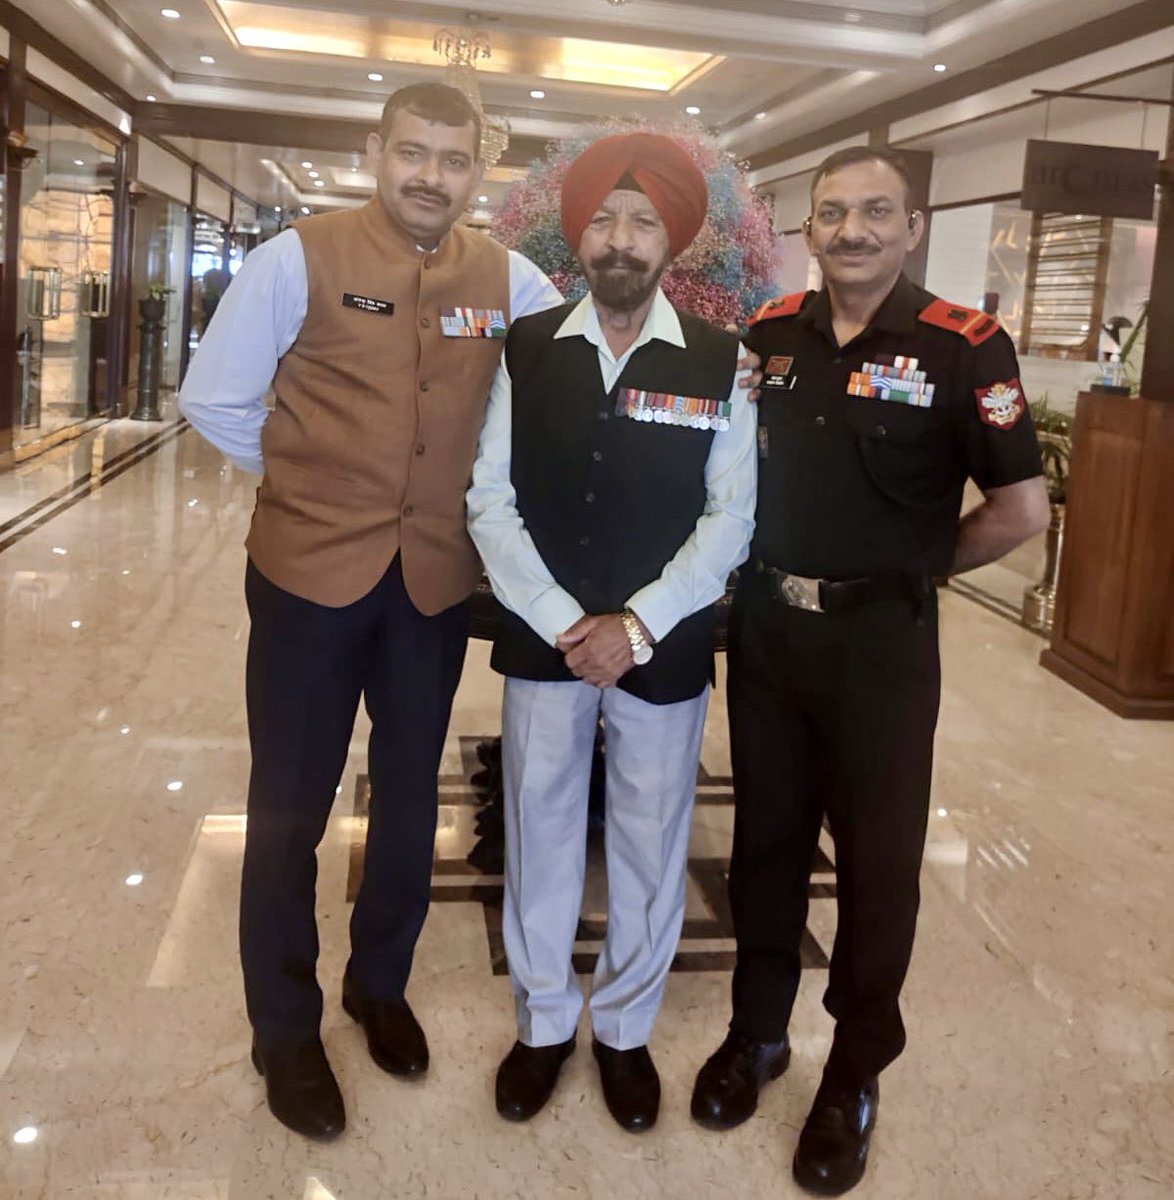 Recipients of Highest Gallantry Award of Indian Army in one frame, it’s always a nice meeting you guys. 🇮🇳🙏🏻